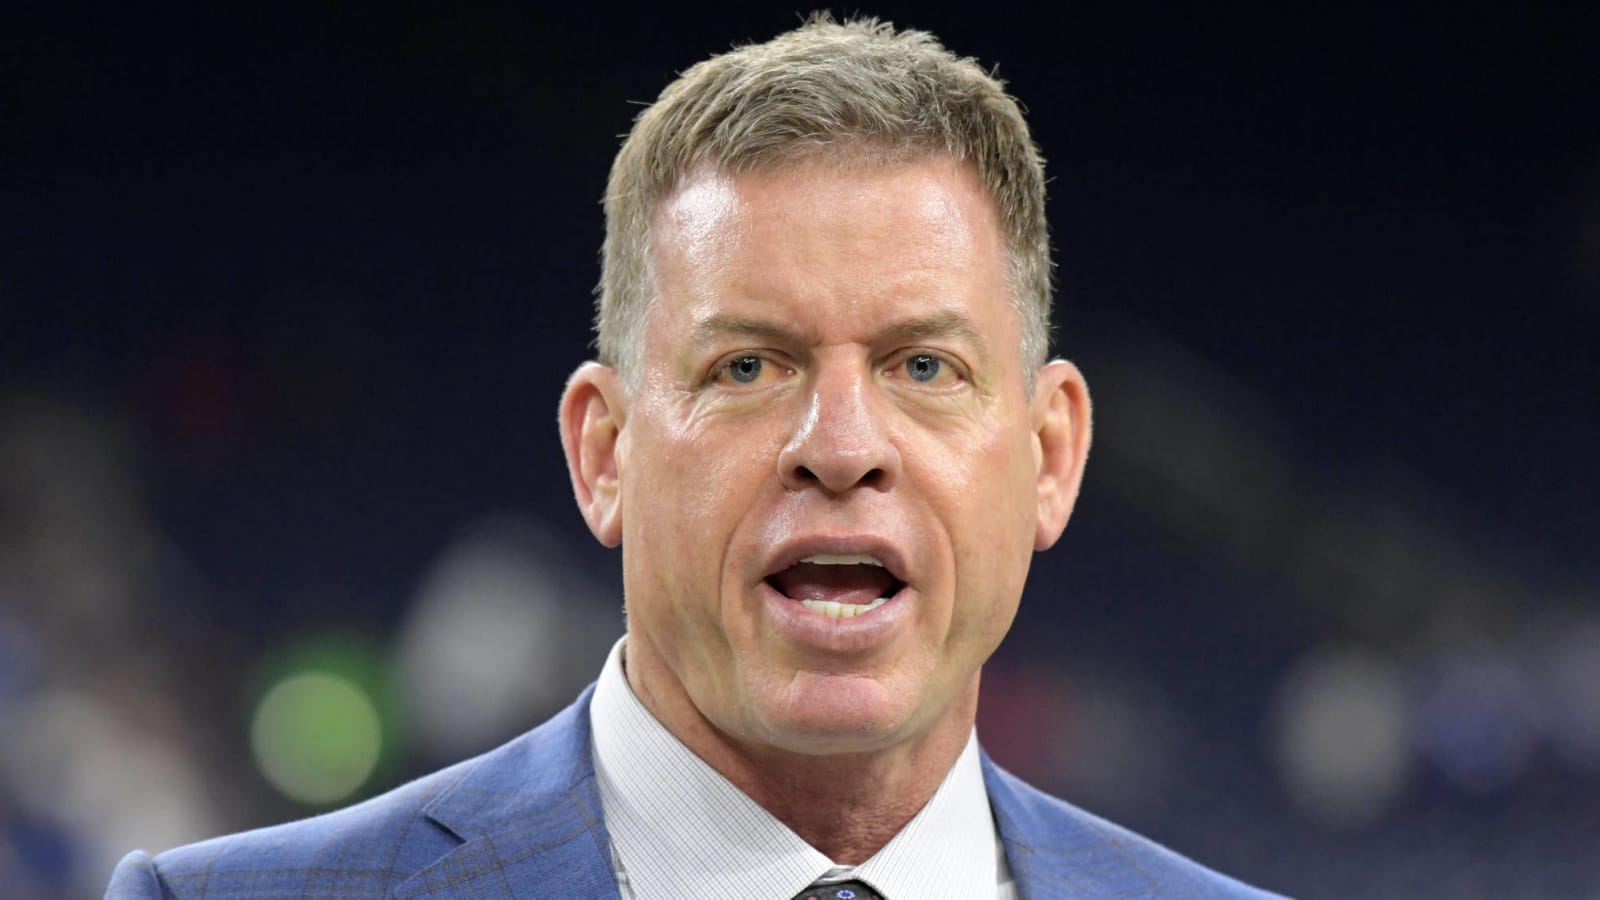 Troy Aikman addresses hot mic comments about pregame military flyover